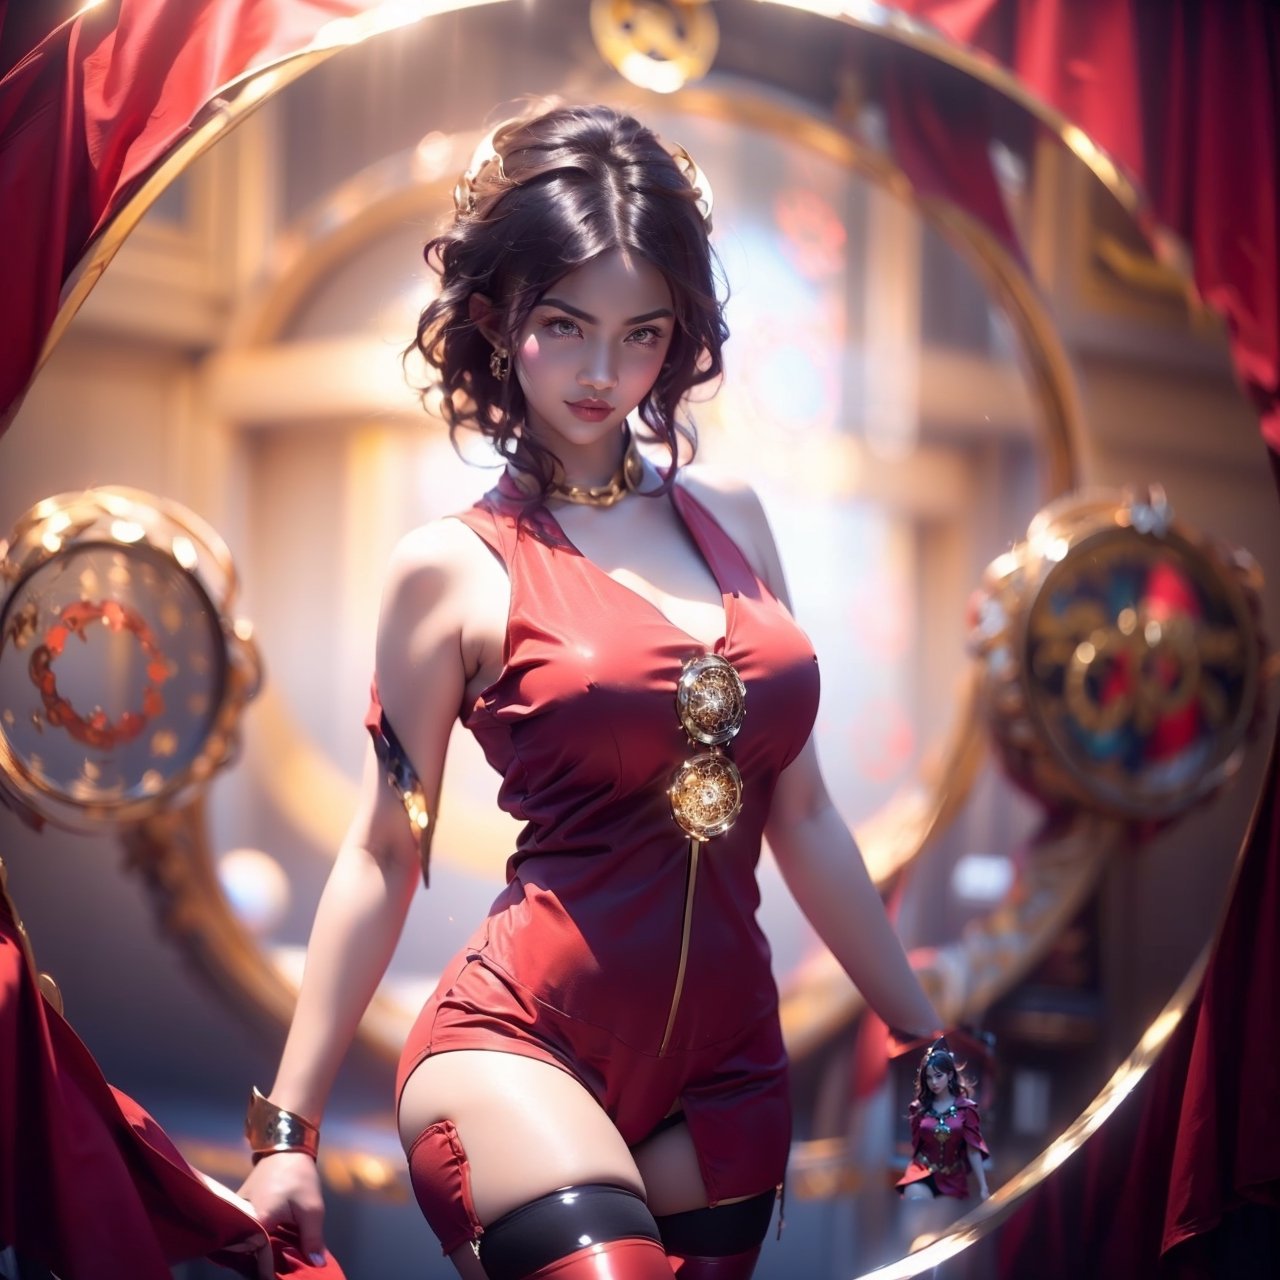 (((naked))), (((busty))), (((short hair))),(((stockings underwear))),(((gifts)),Makeup, More Detail, GdClth, (((goddess)), (((magic circle))),(((red clothes)),